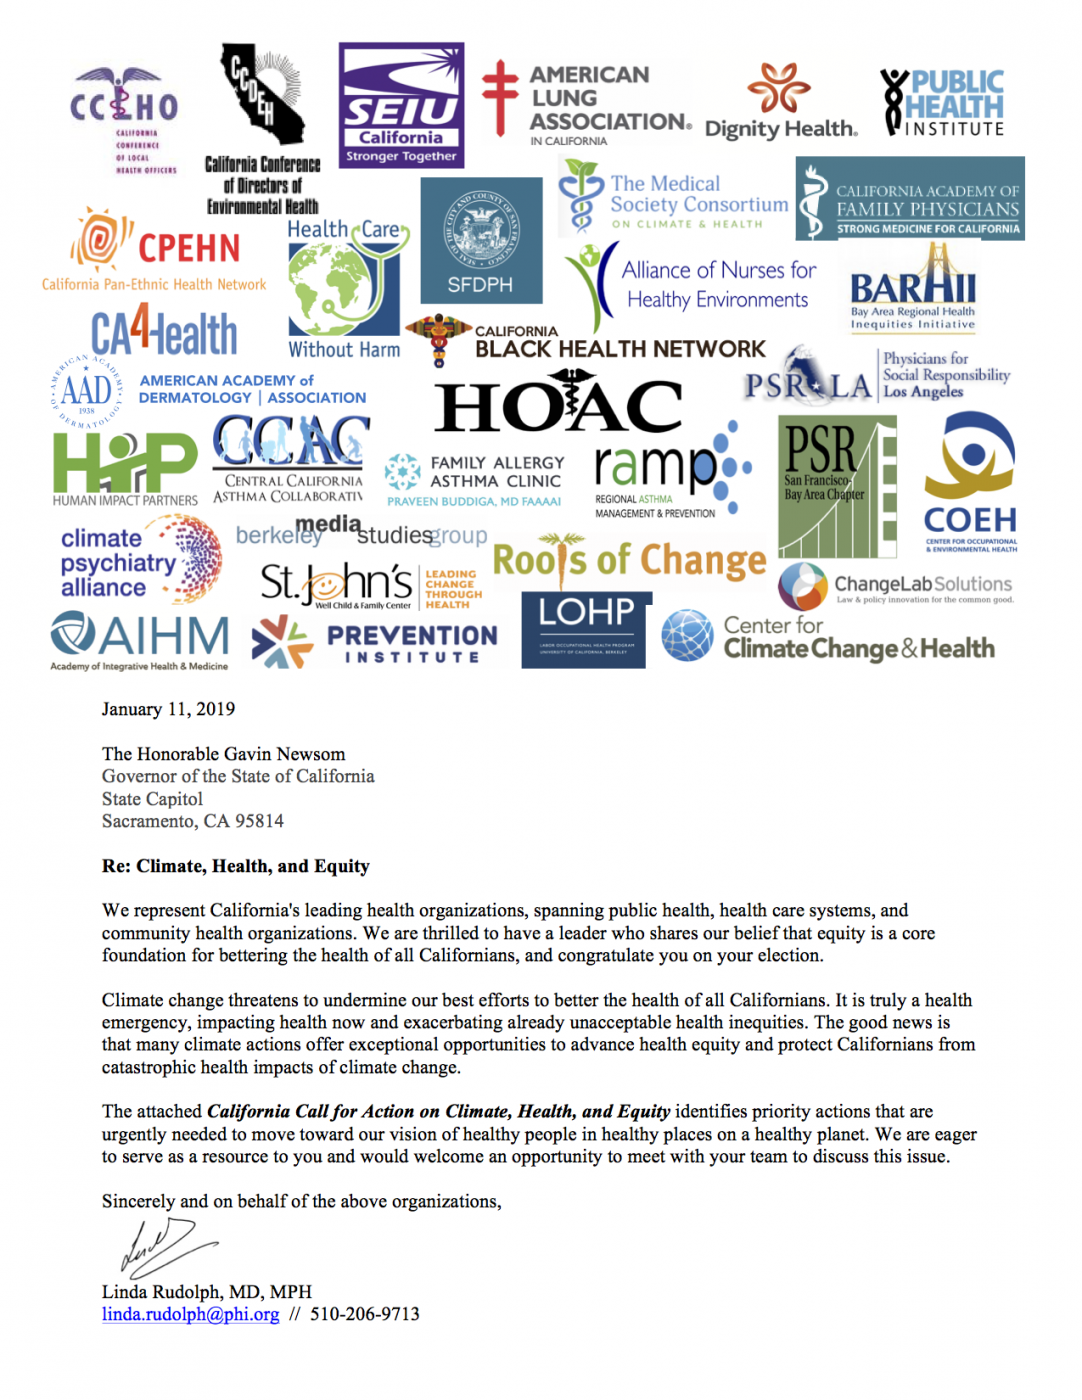 7_Climate_Health_Equity_CallforAction_CoverLetter_01_14_19